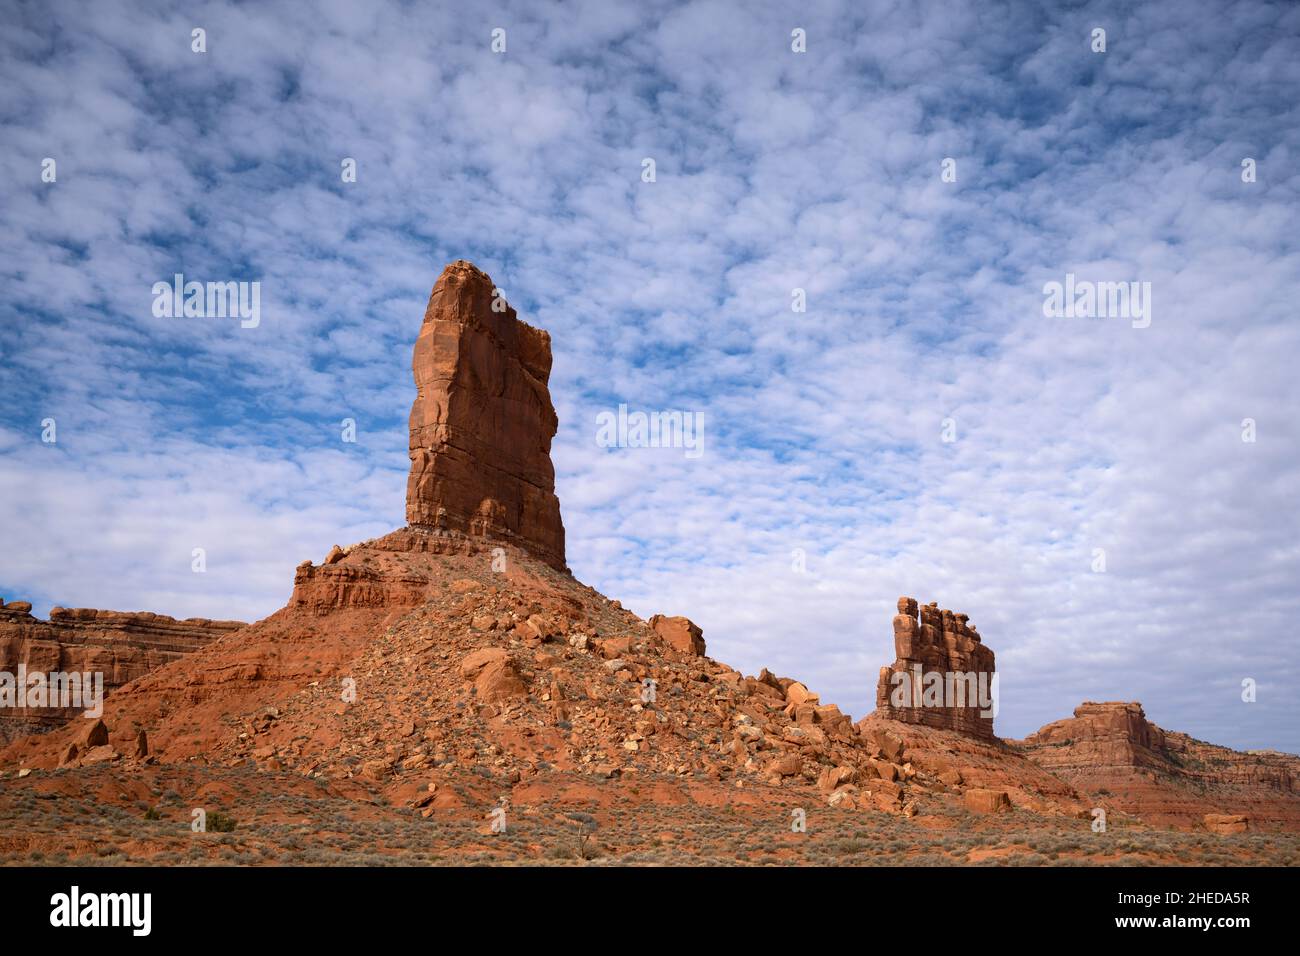 Castle Butte and De Gaulle And His Troops sandstone rock formations in Valley of the Gods, Utah. Stock Photo